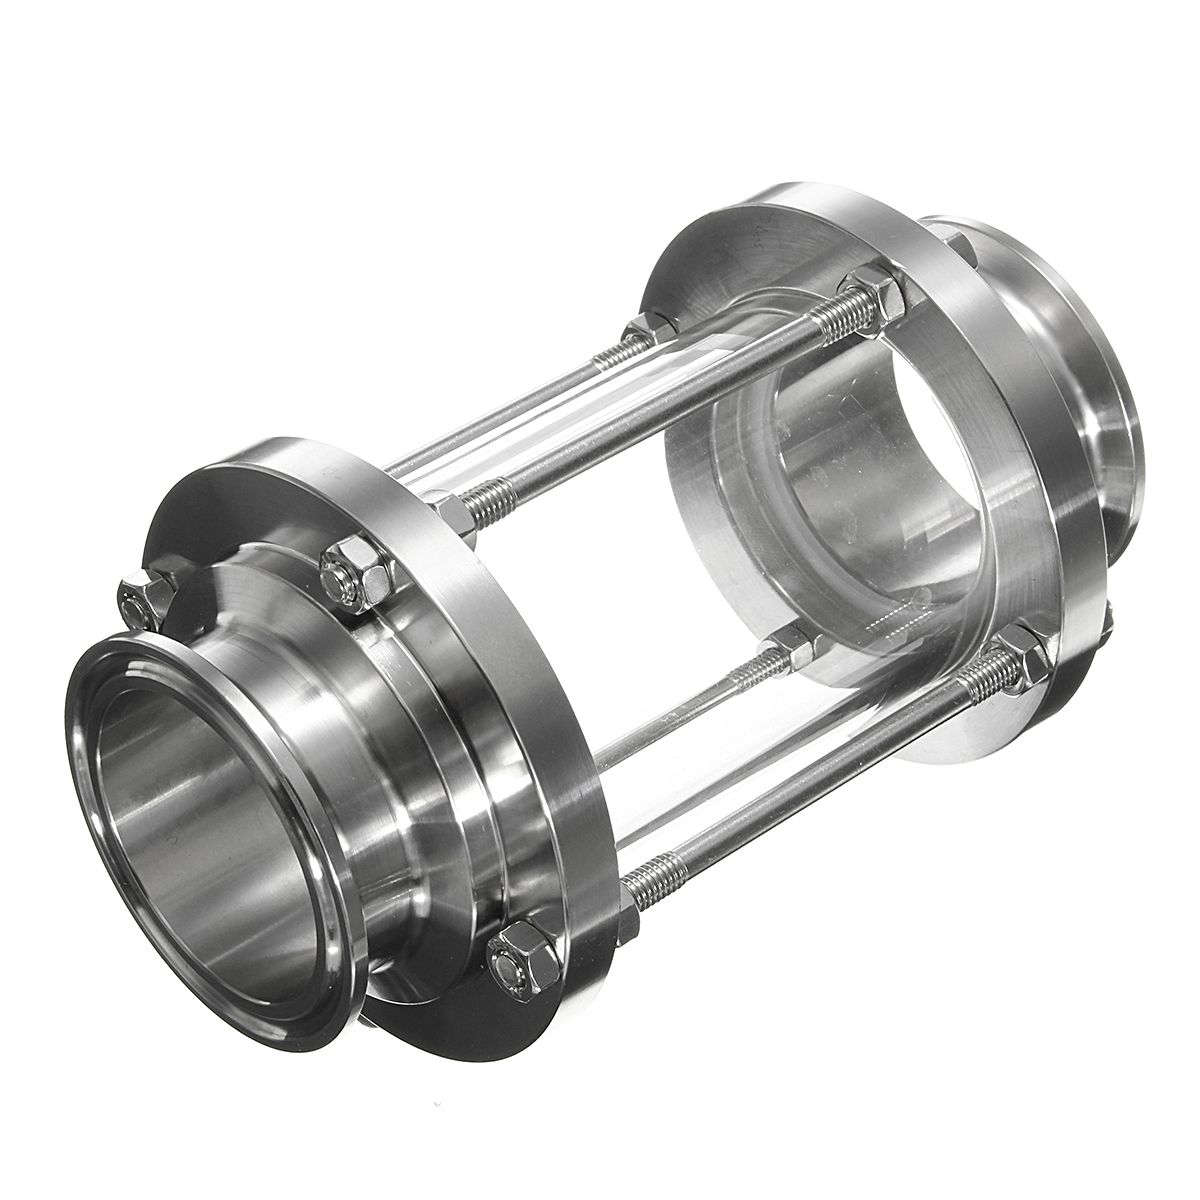 304-Stainless-Steel-Glass-Multiple-Tri-Clamp-Type-Flow-Sight-Sanitary-Fitting-1093012